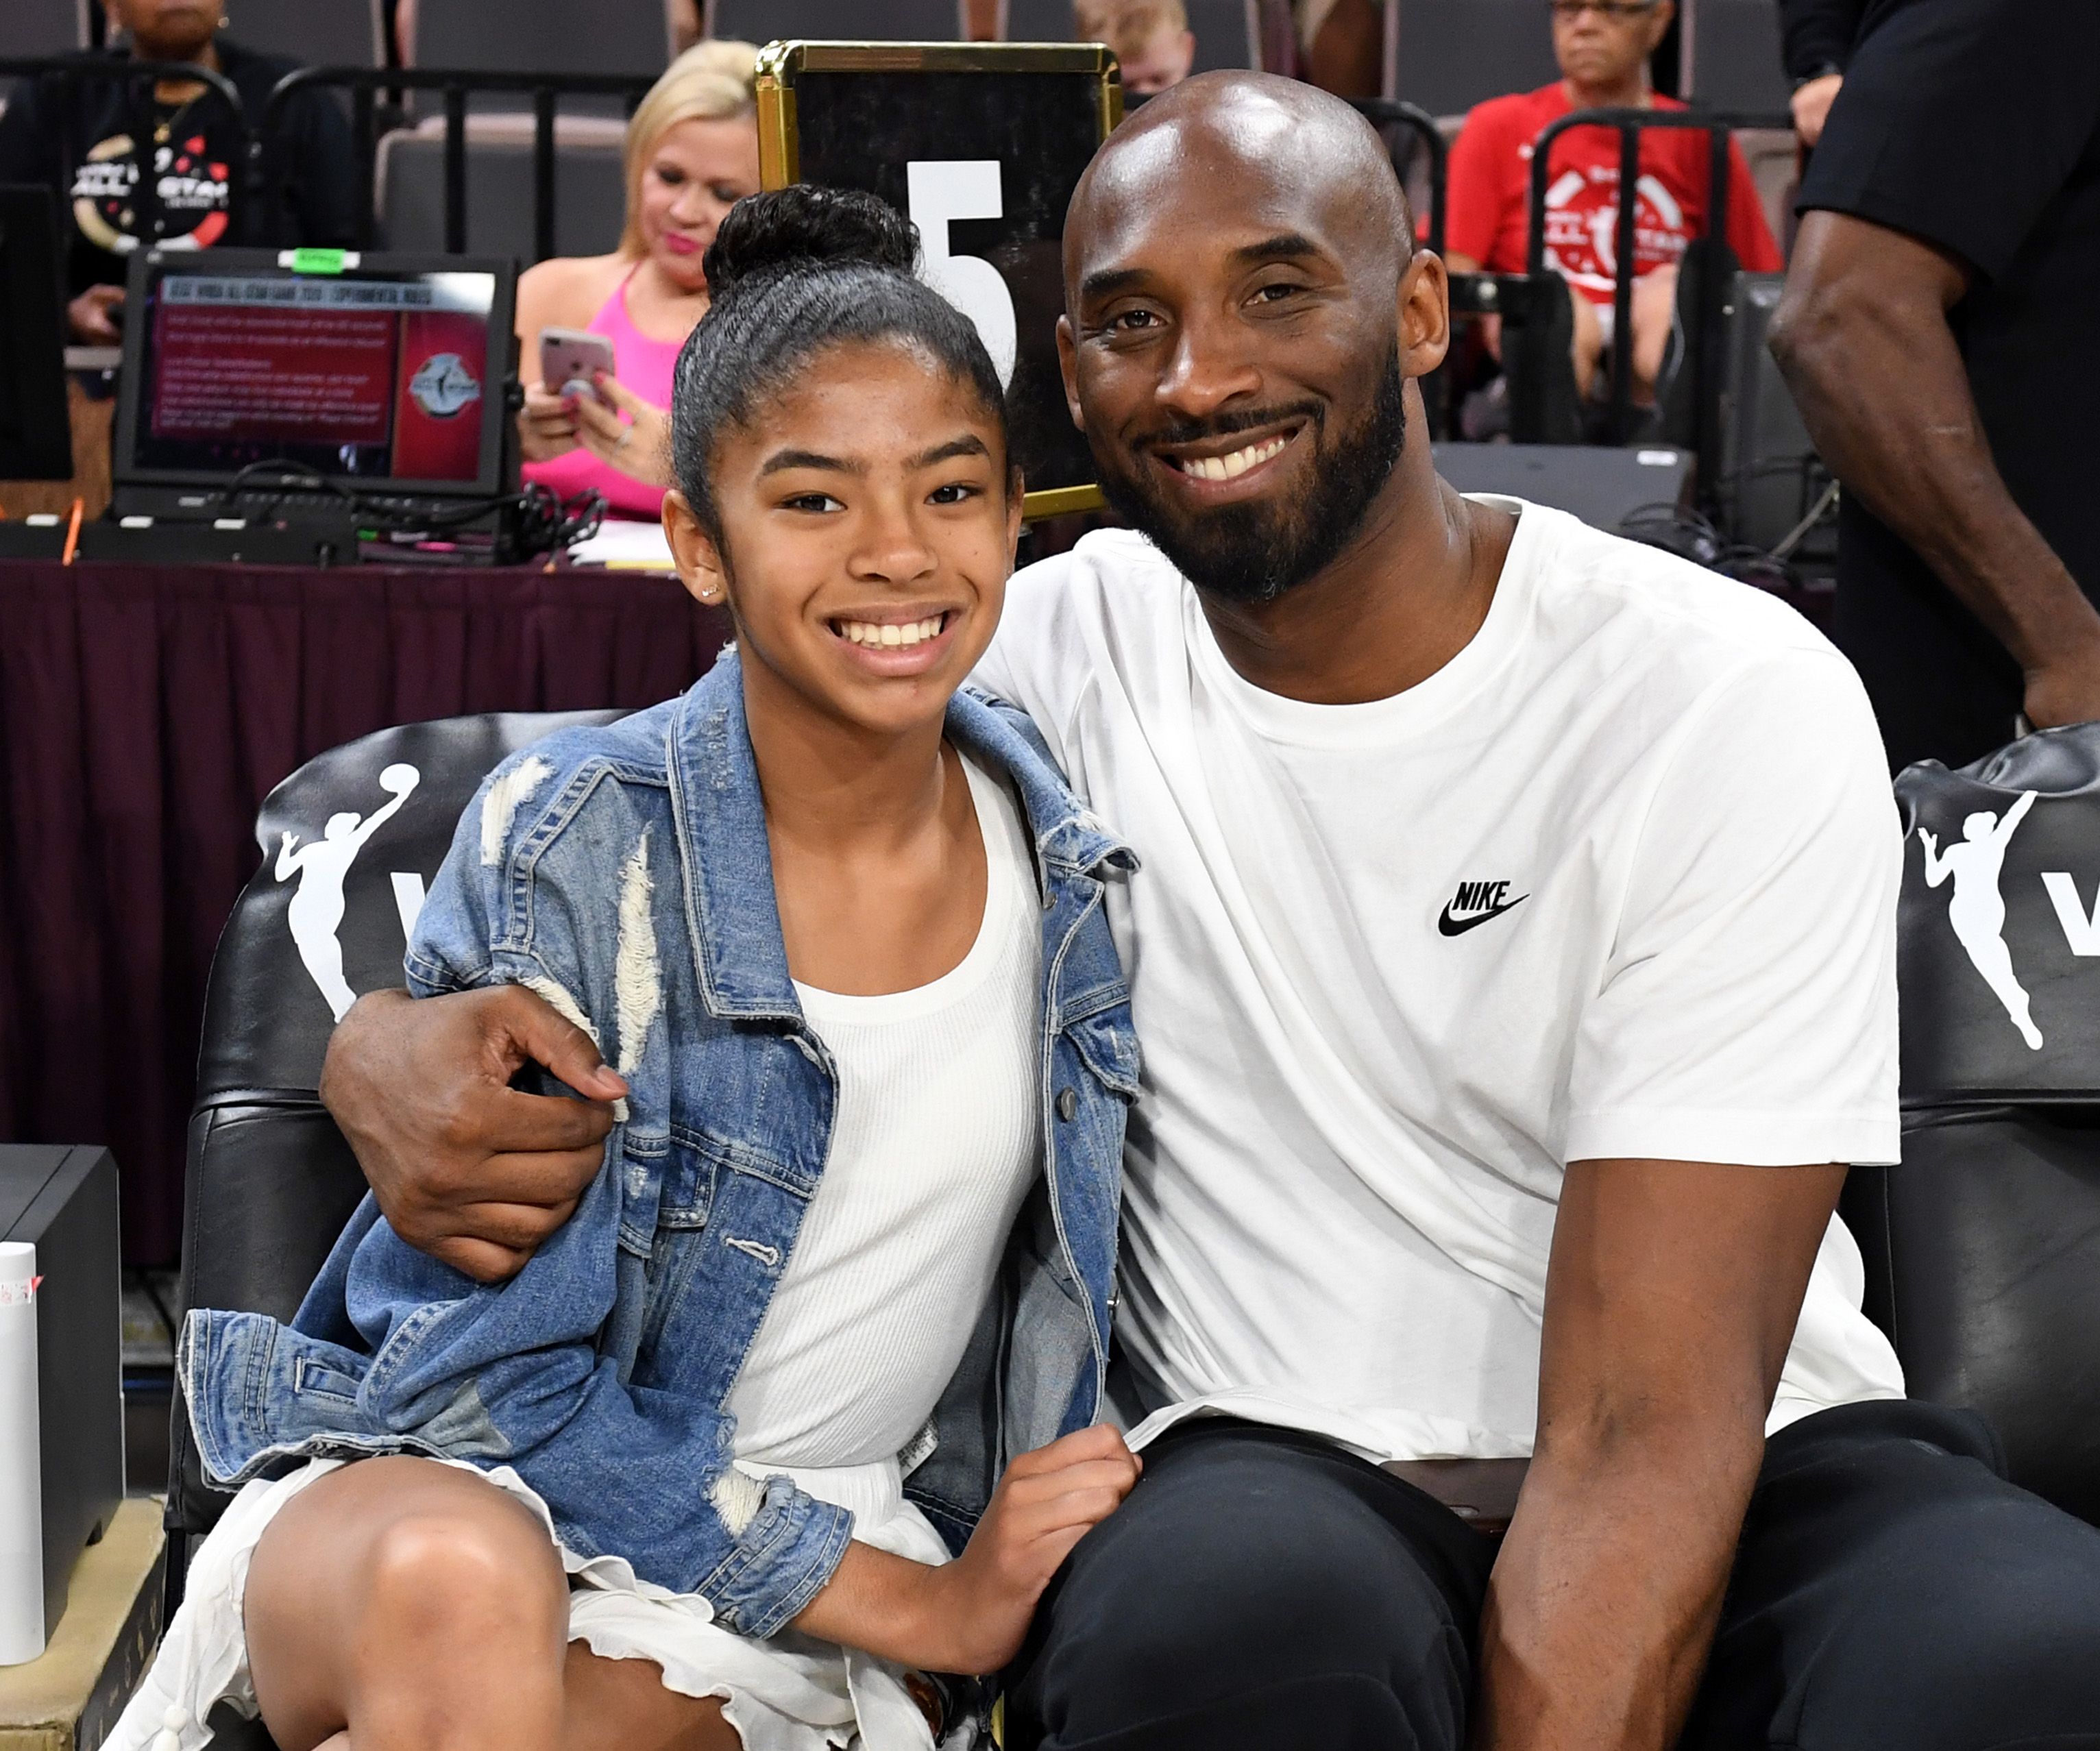 Gianna Bryant and former NBA player Kobe Bryant, at the WNBA All-Star Game 2019 at the Mandalay Bay Events Center on July 27, 2019 in Las Vegas, Nevada | Photo: Getty Images